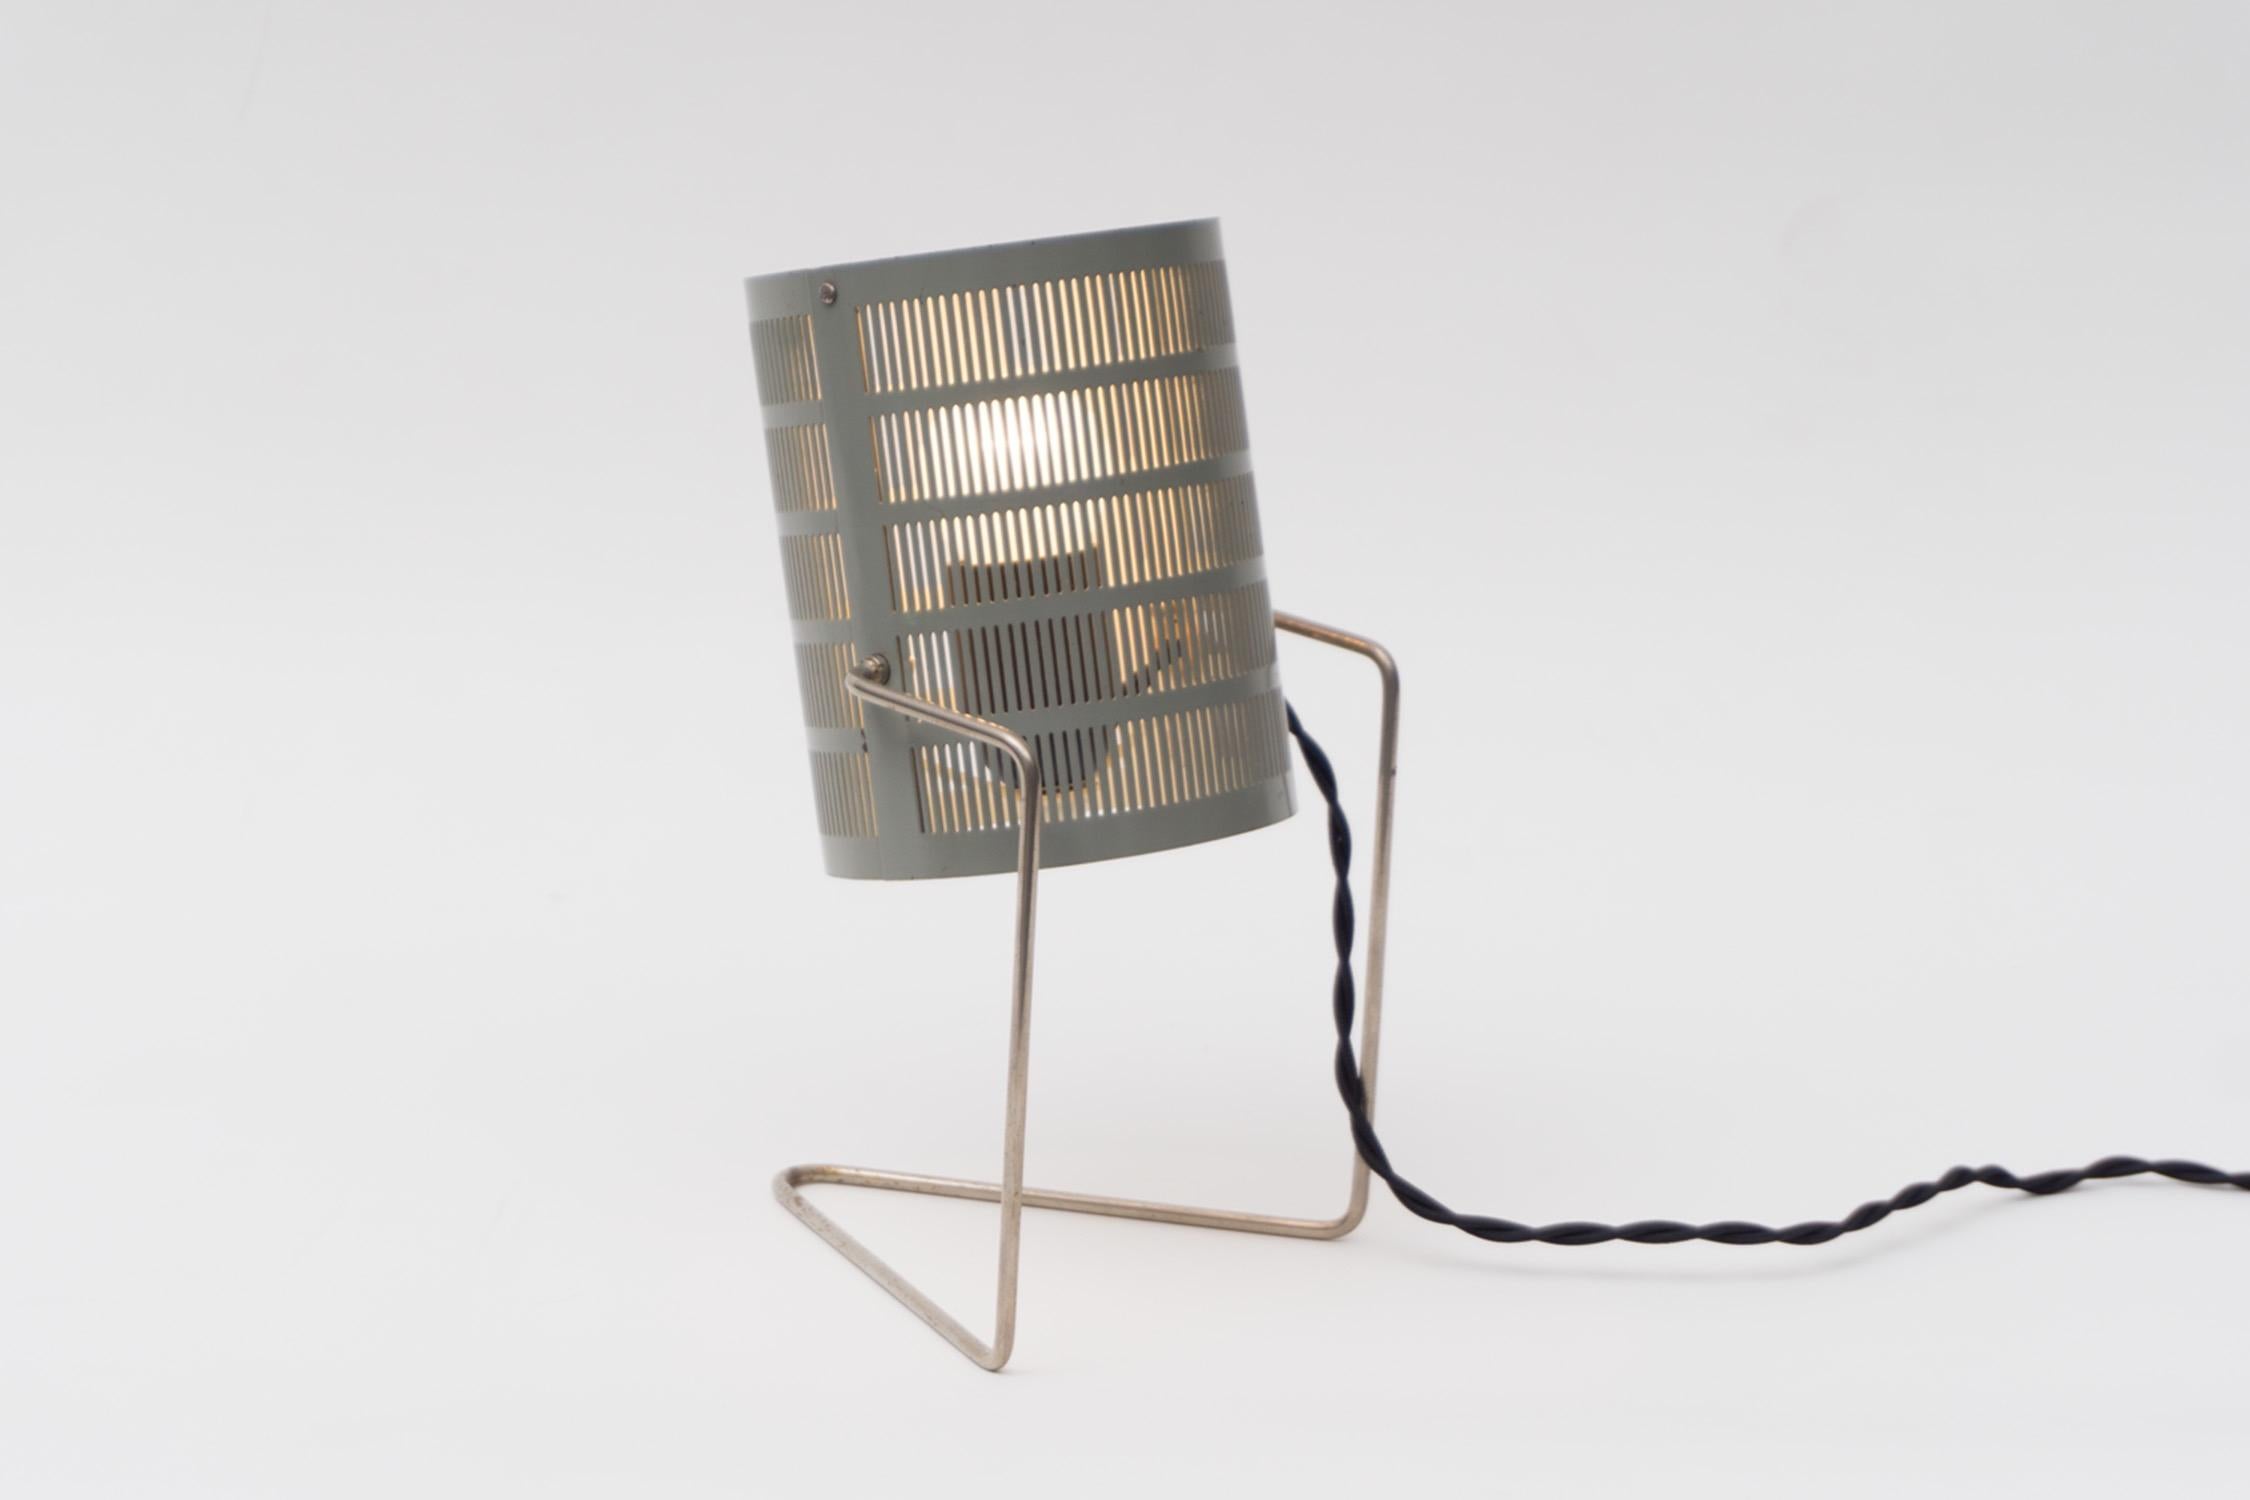 Modern Table Lamp, Aluminum, by Giardi e Barzaghi, 1955-57 For Sale